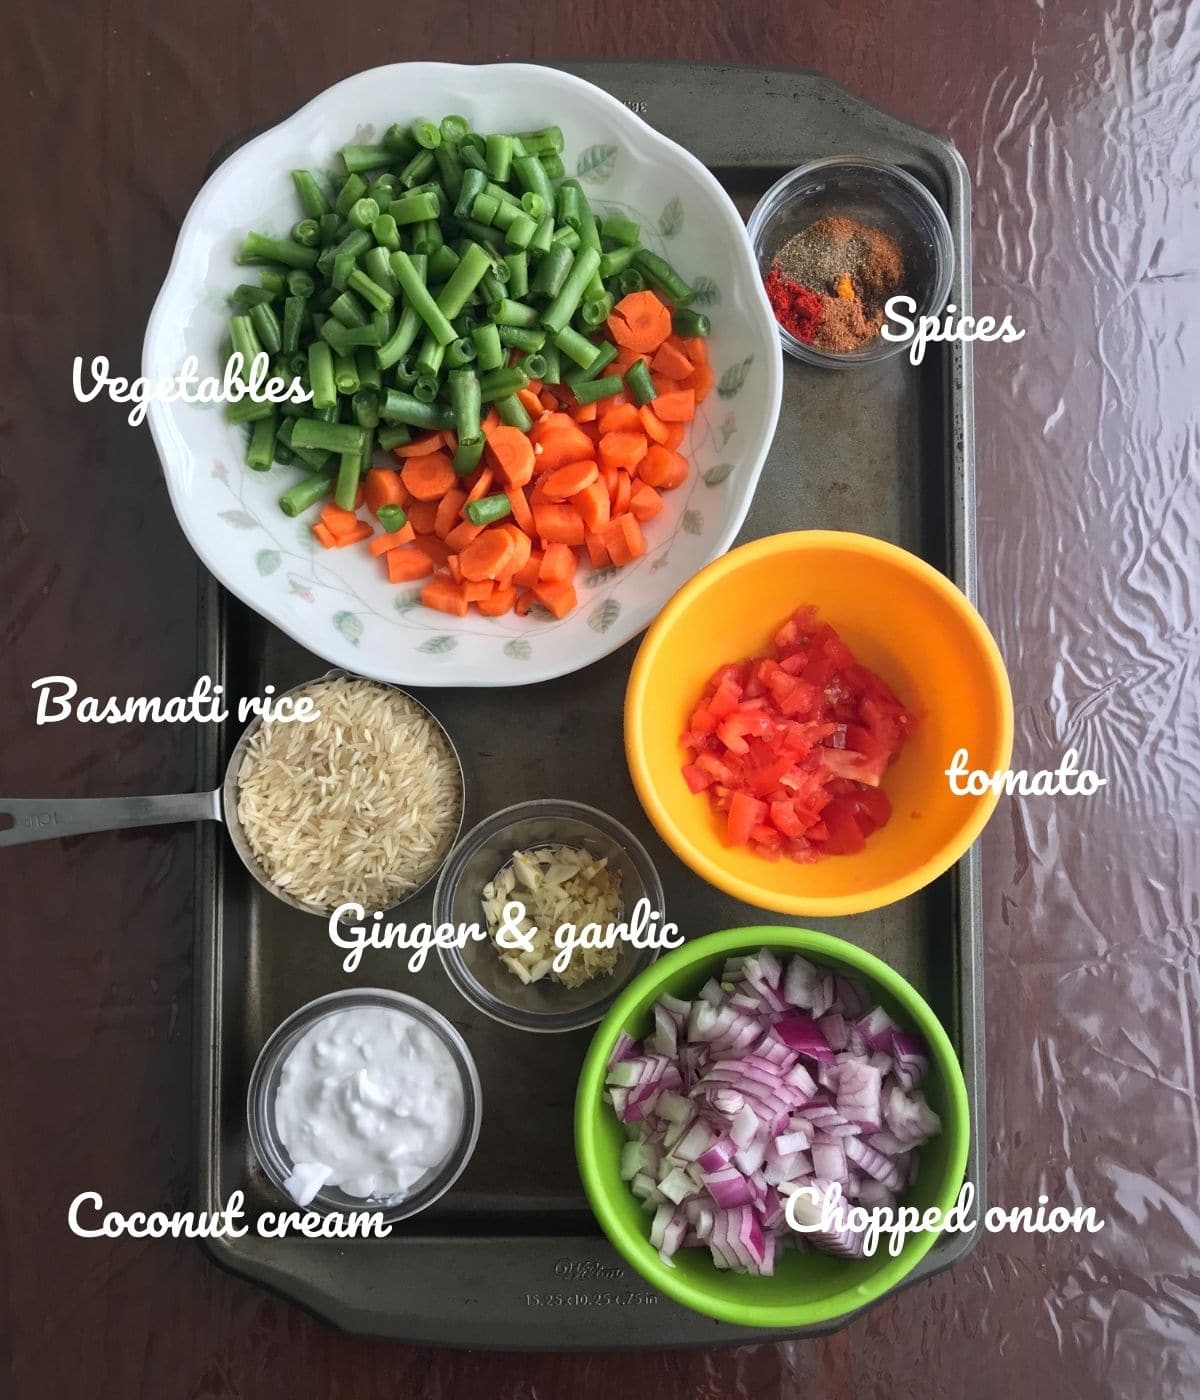 A table is filled with vegetable rice ingredients like rice, vegetables, and spices